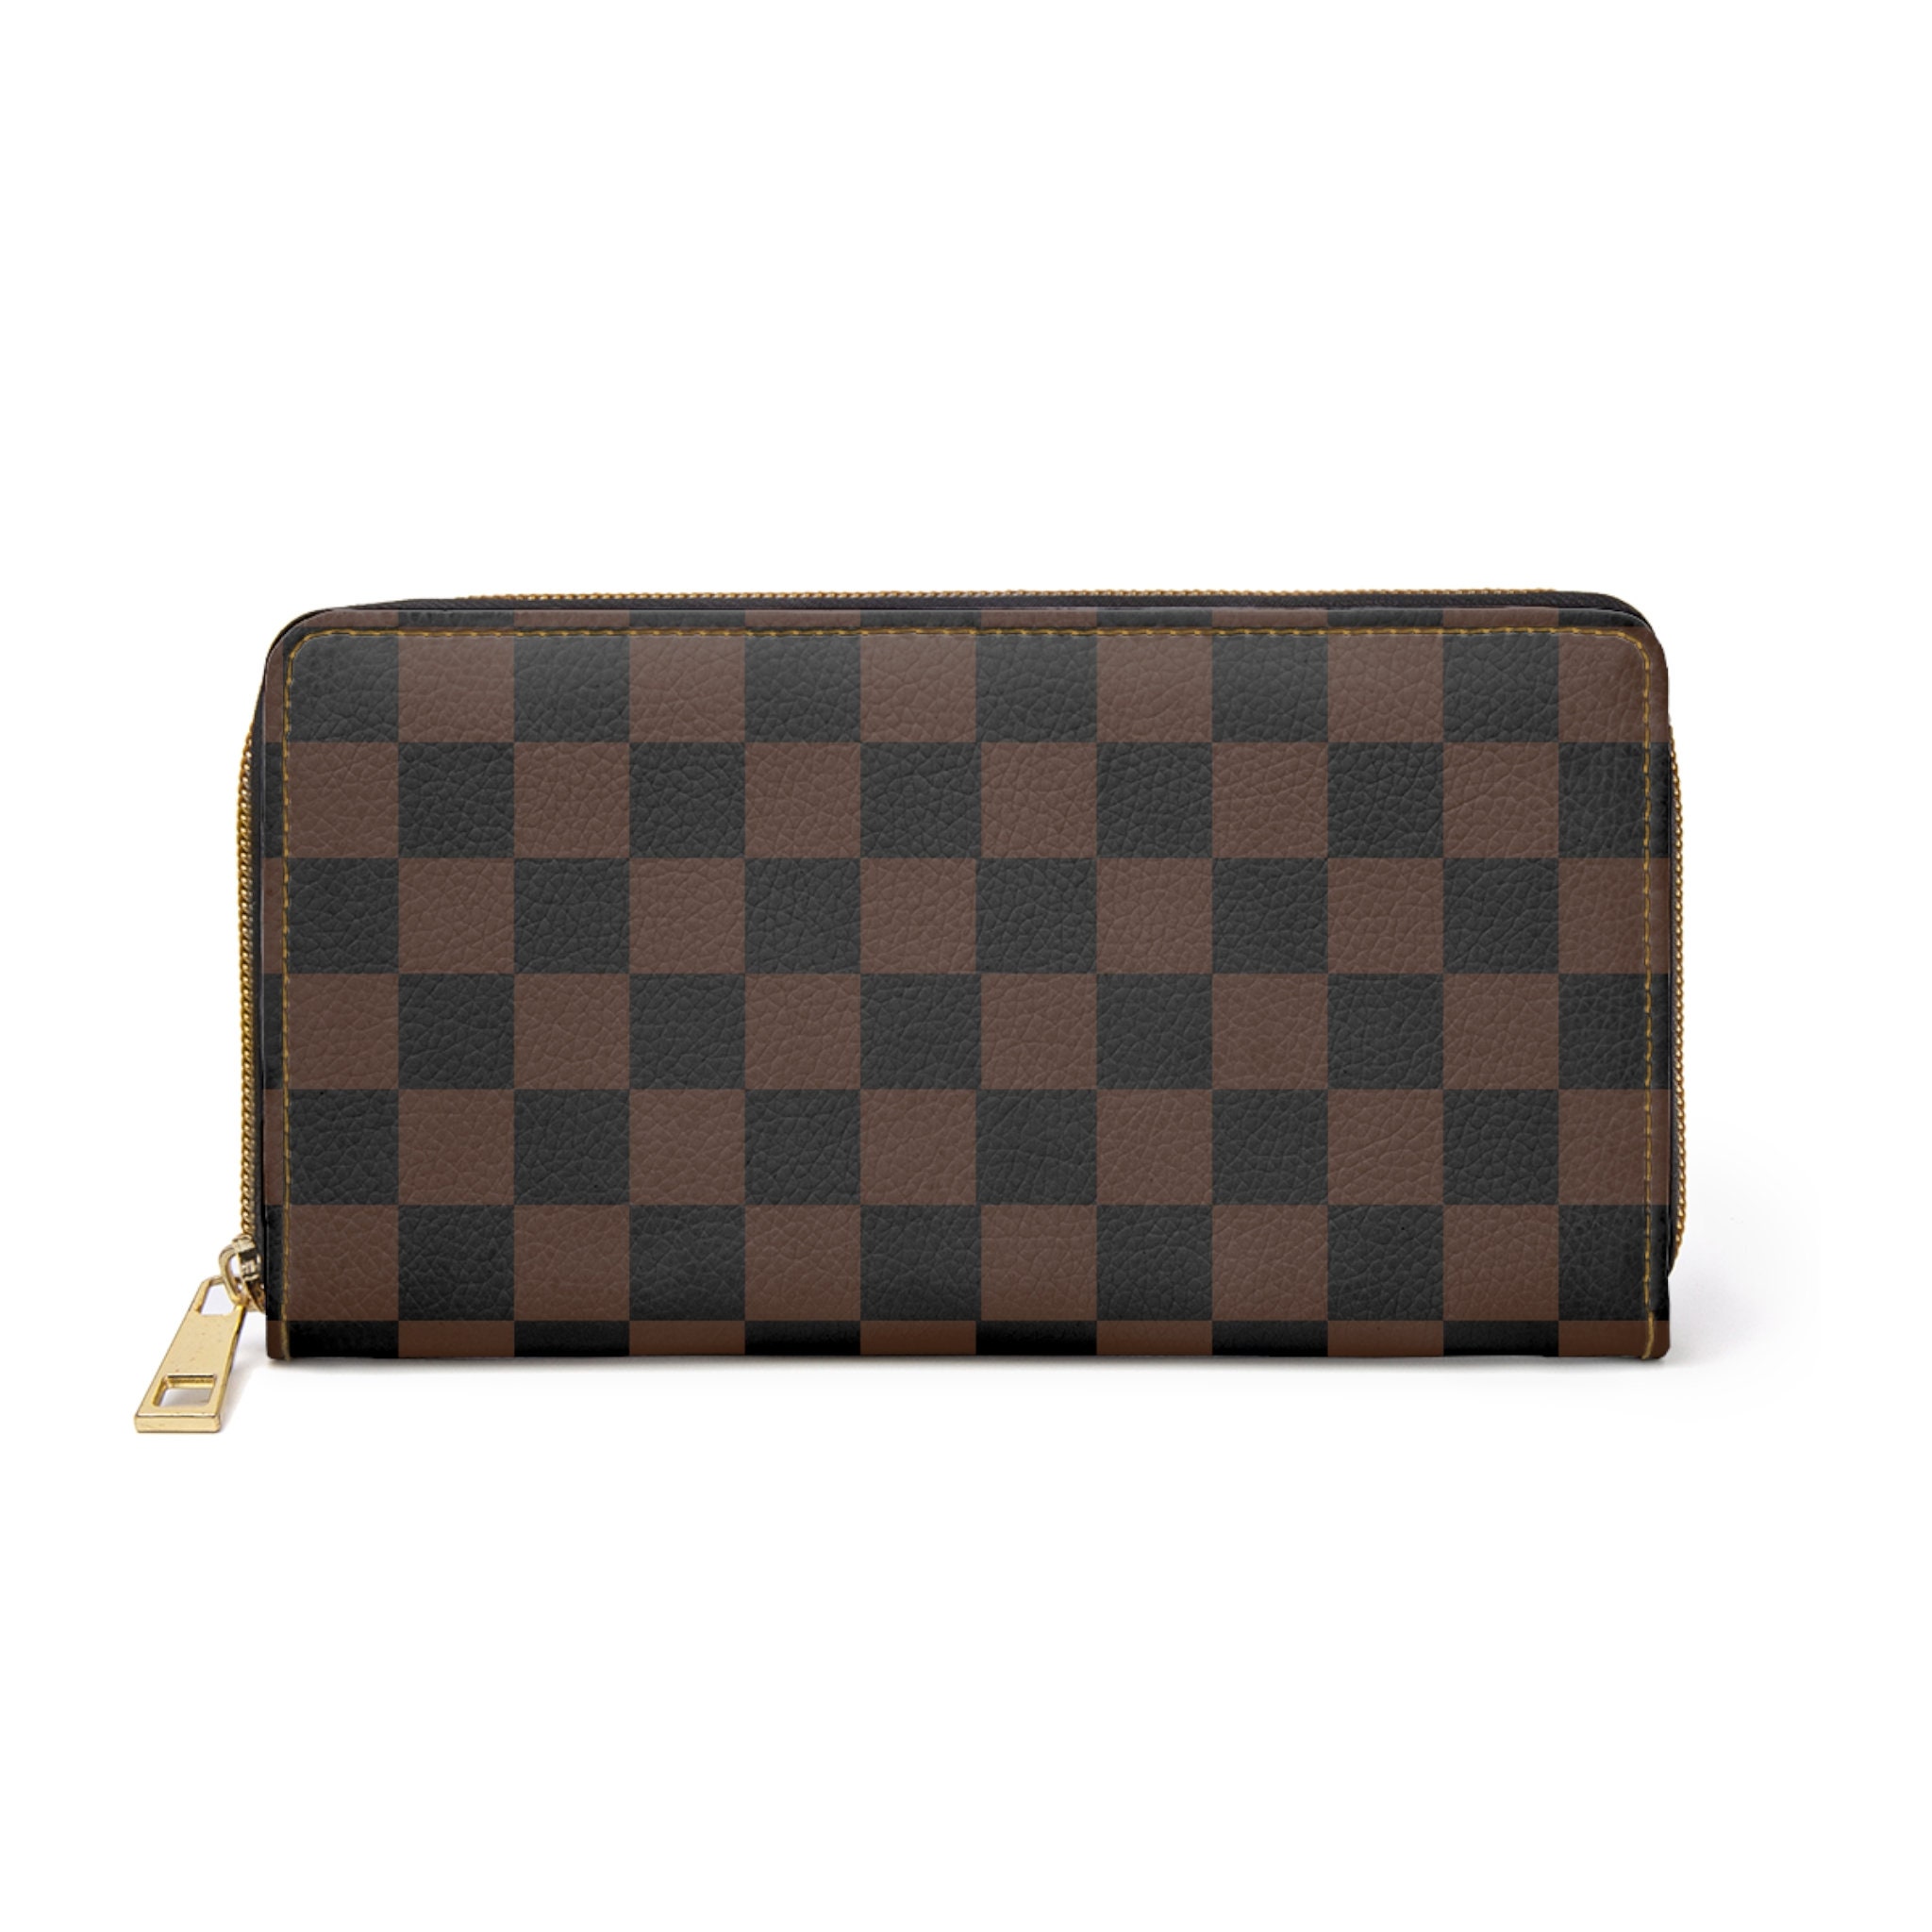 Louis Vuitton womens wallet - $170 - clothing & accessories - by